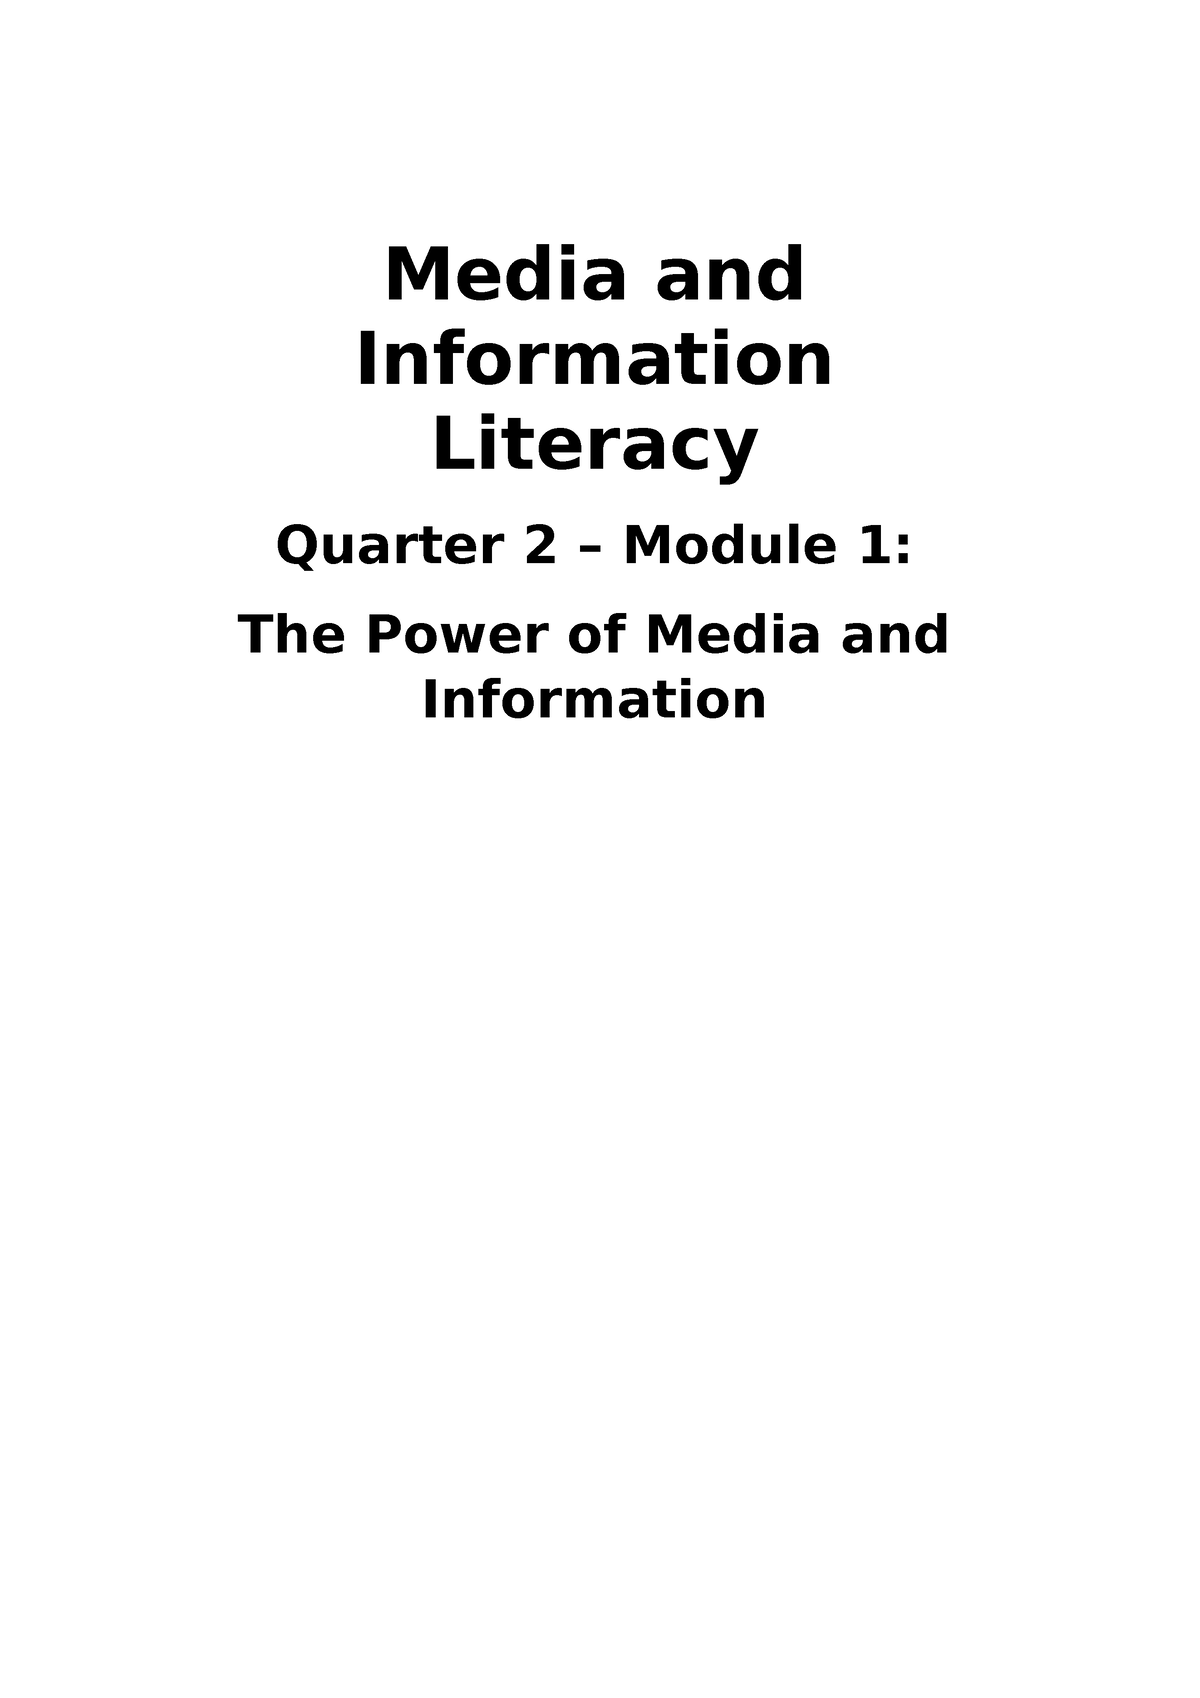 Media and Information Literacy - Media and Information Literacy Quarter ...